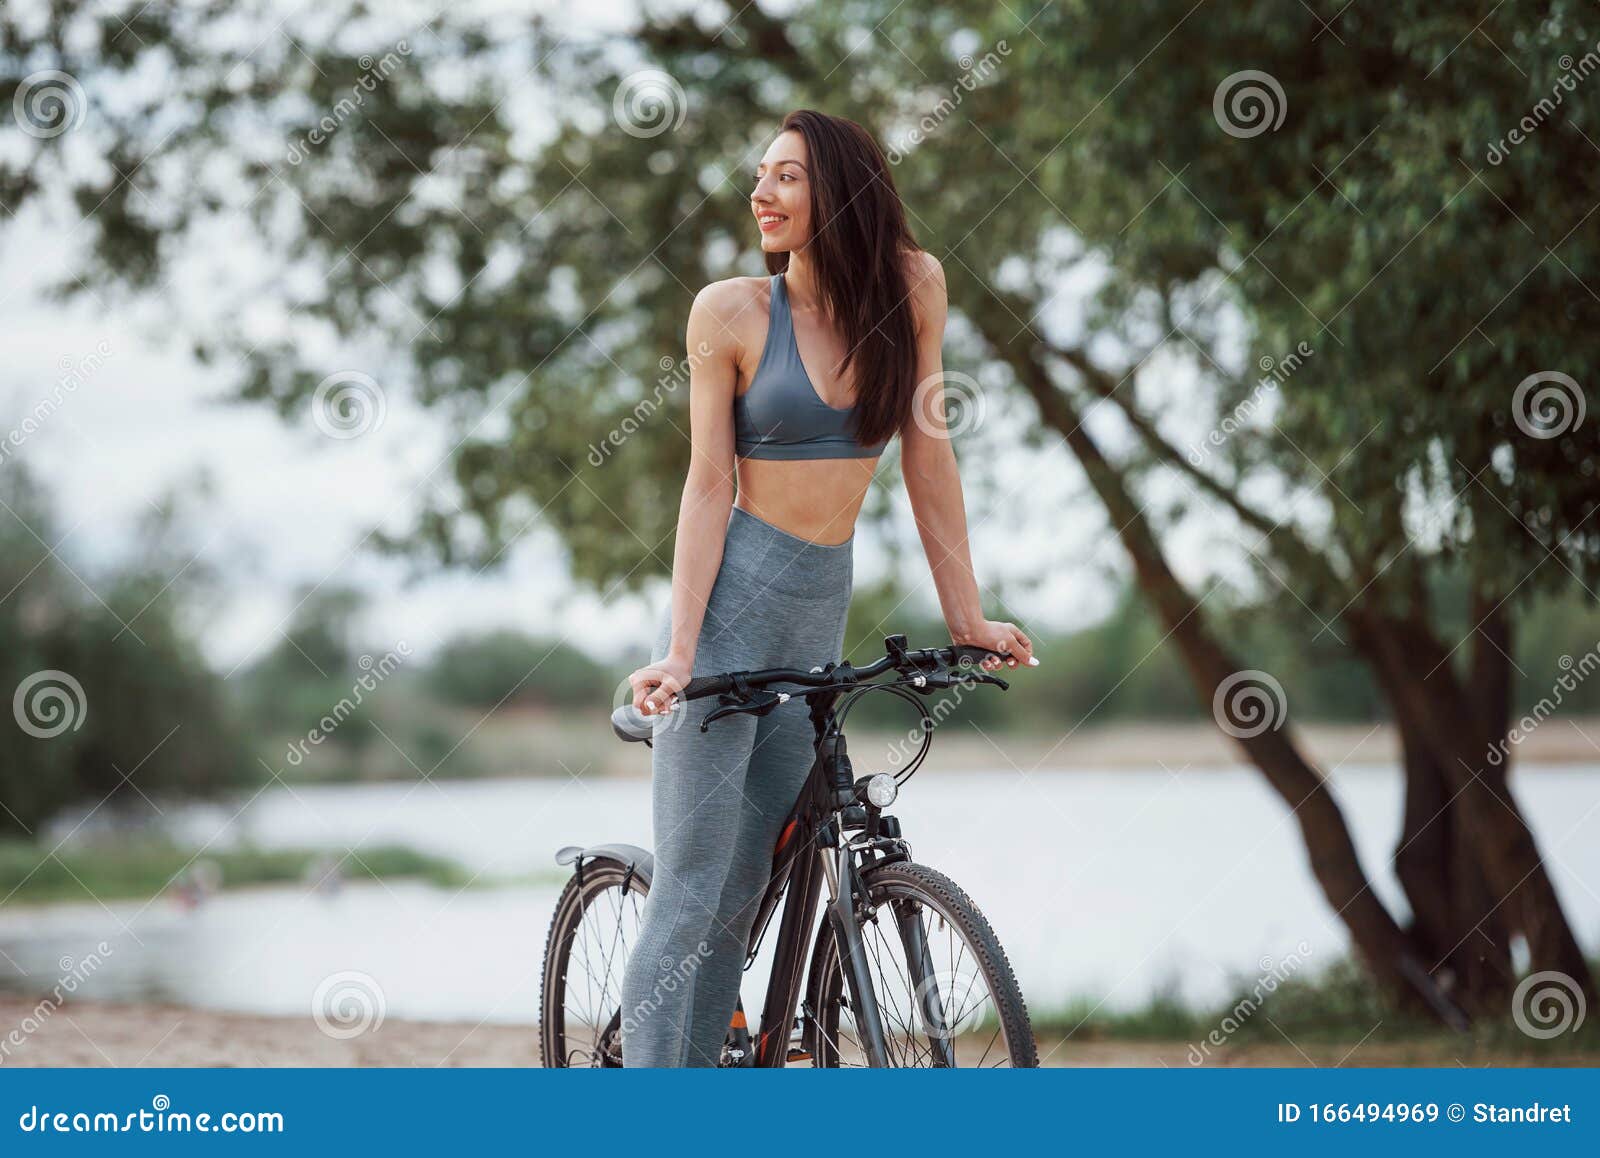 Cyclists body female There are